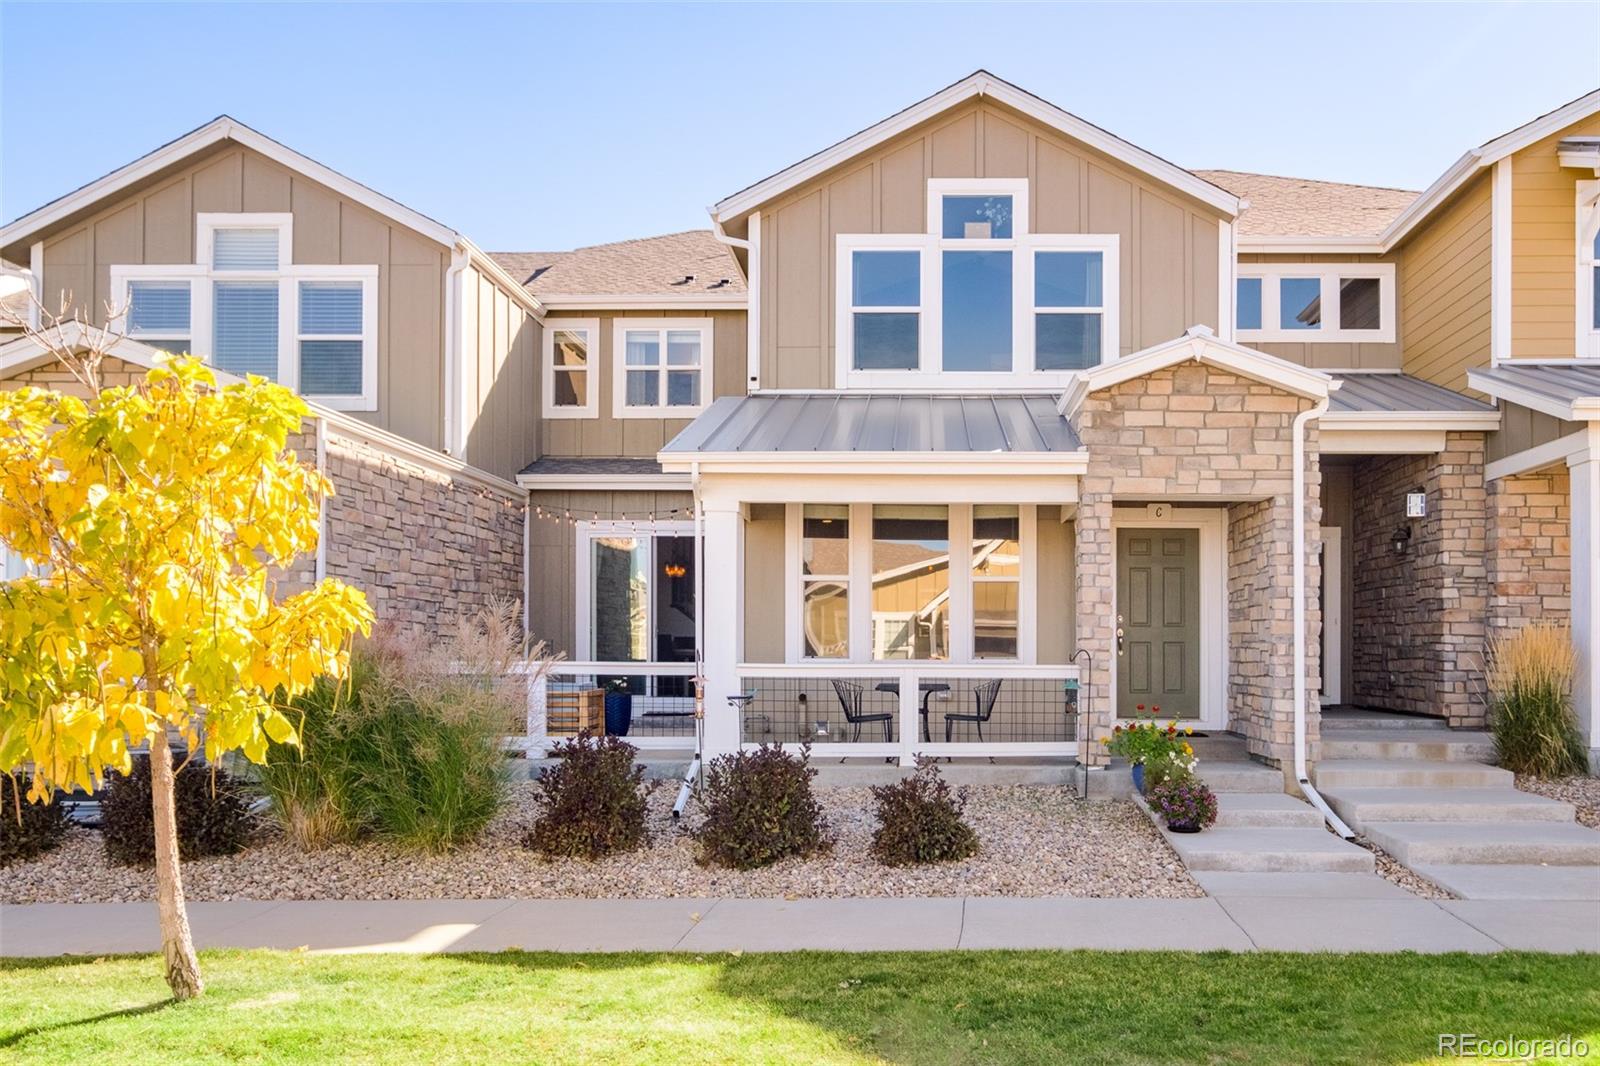 14274 W 88th Drive, arvada MLS: 4798723 Beds: 4 Baths: 4 Price: $725,000